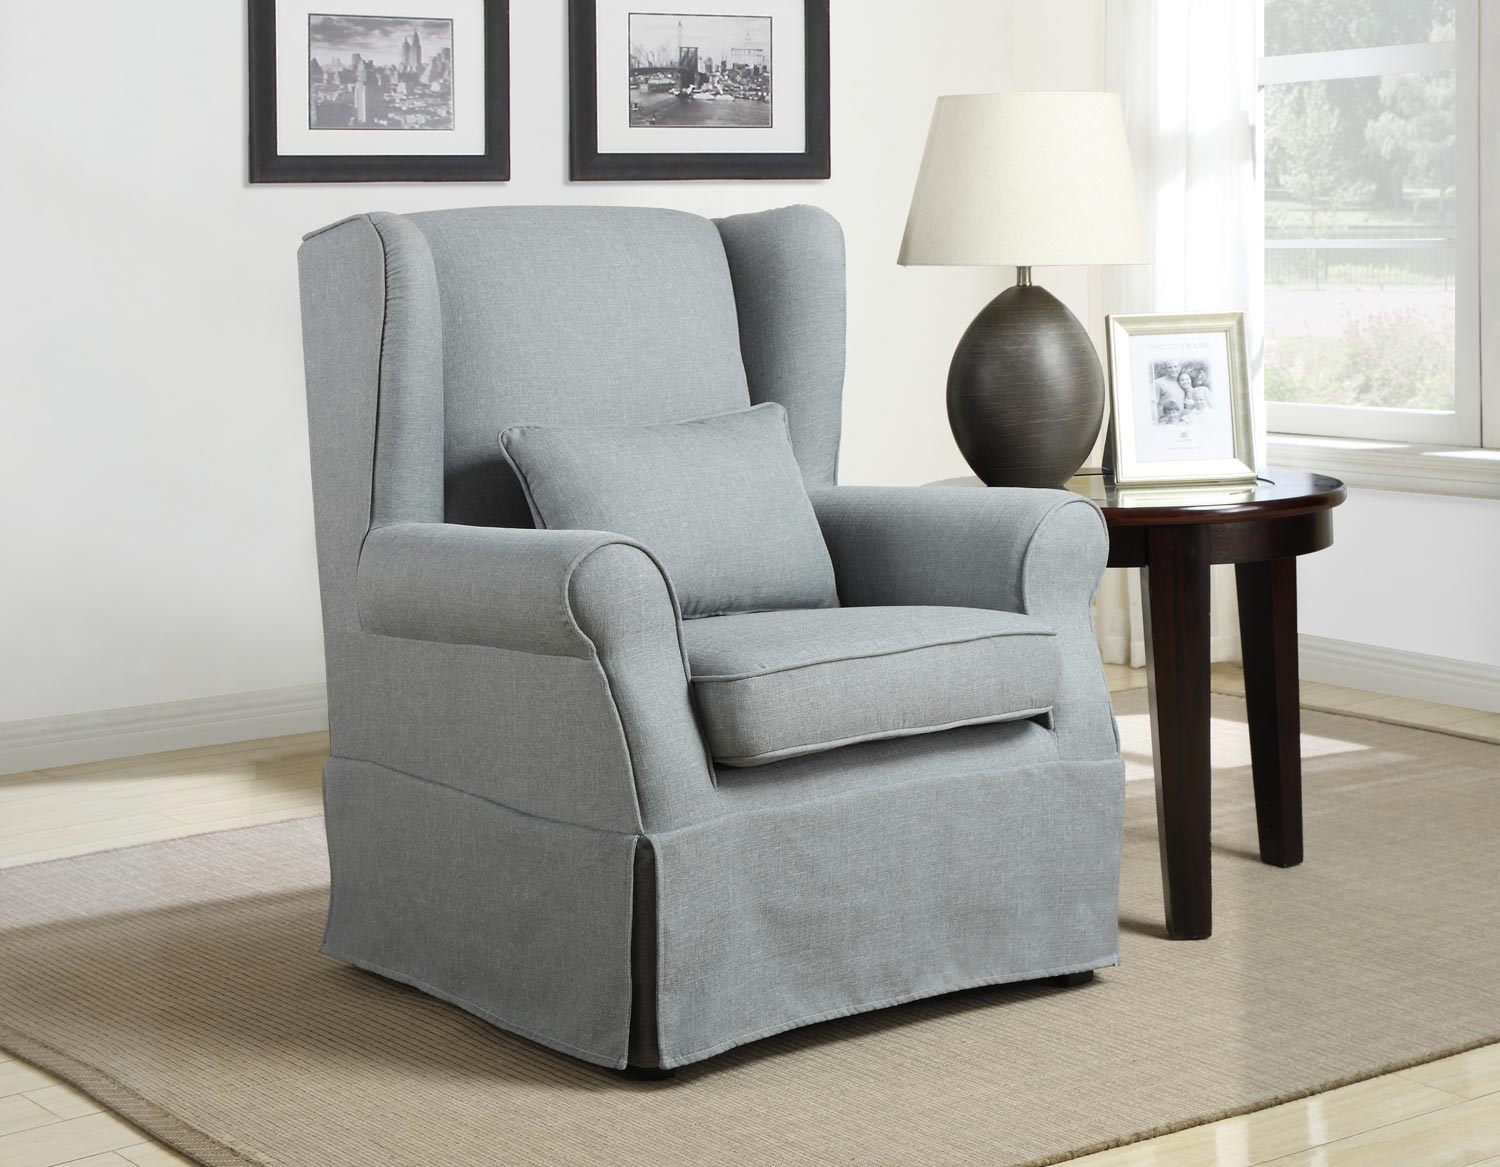 Homelegance Alden Accent Chair with 1 Kidney Pillow - Grey